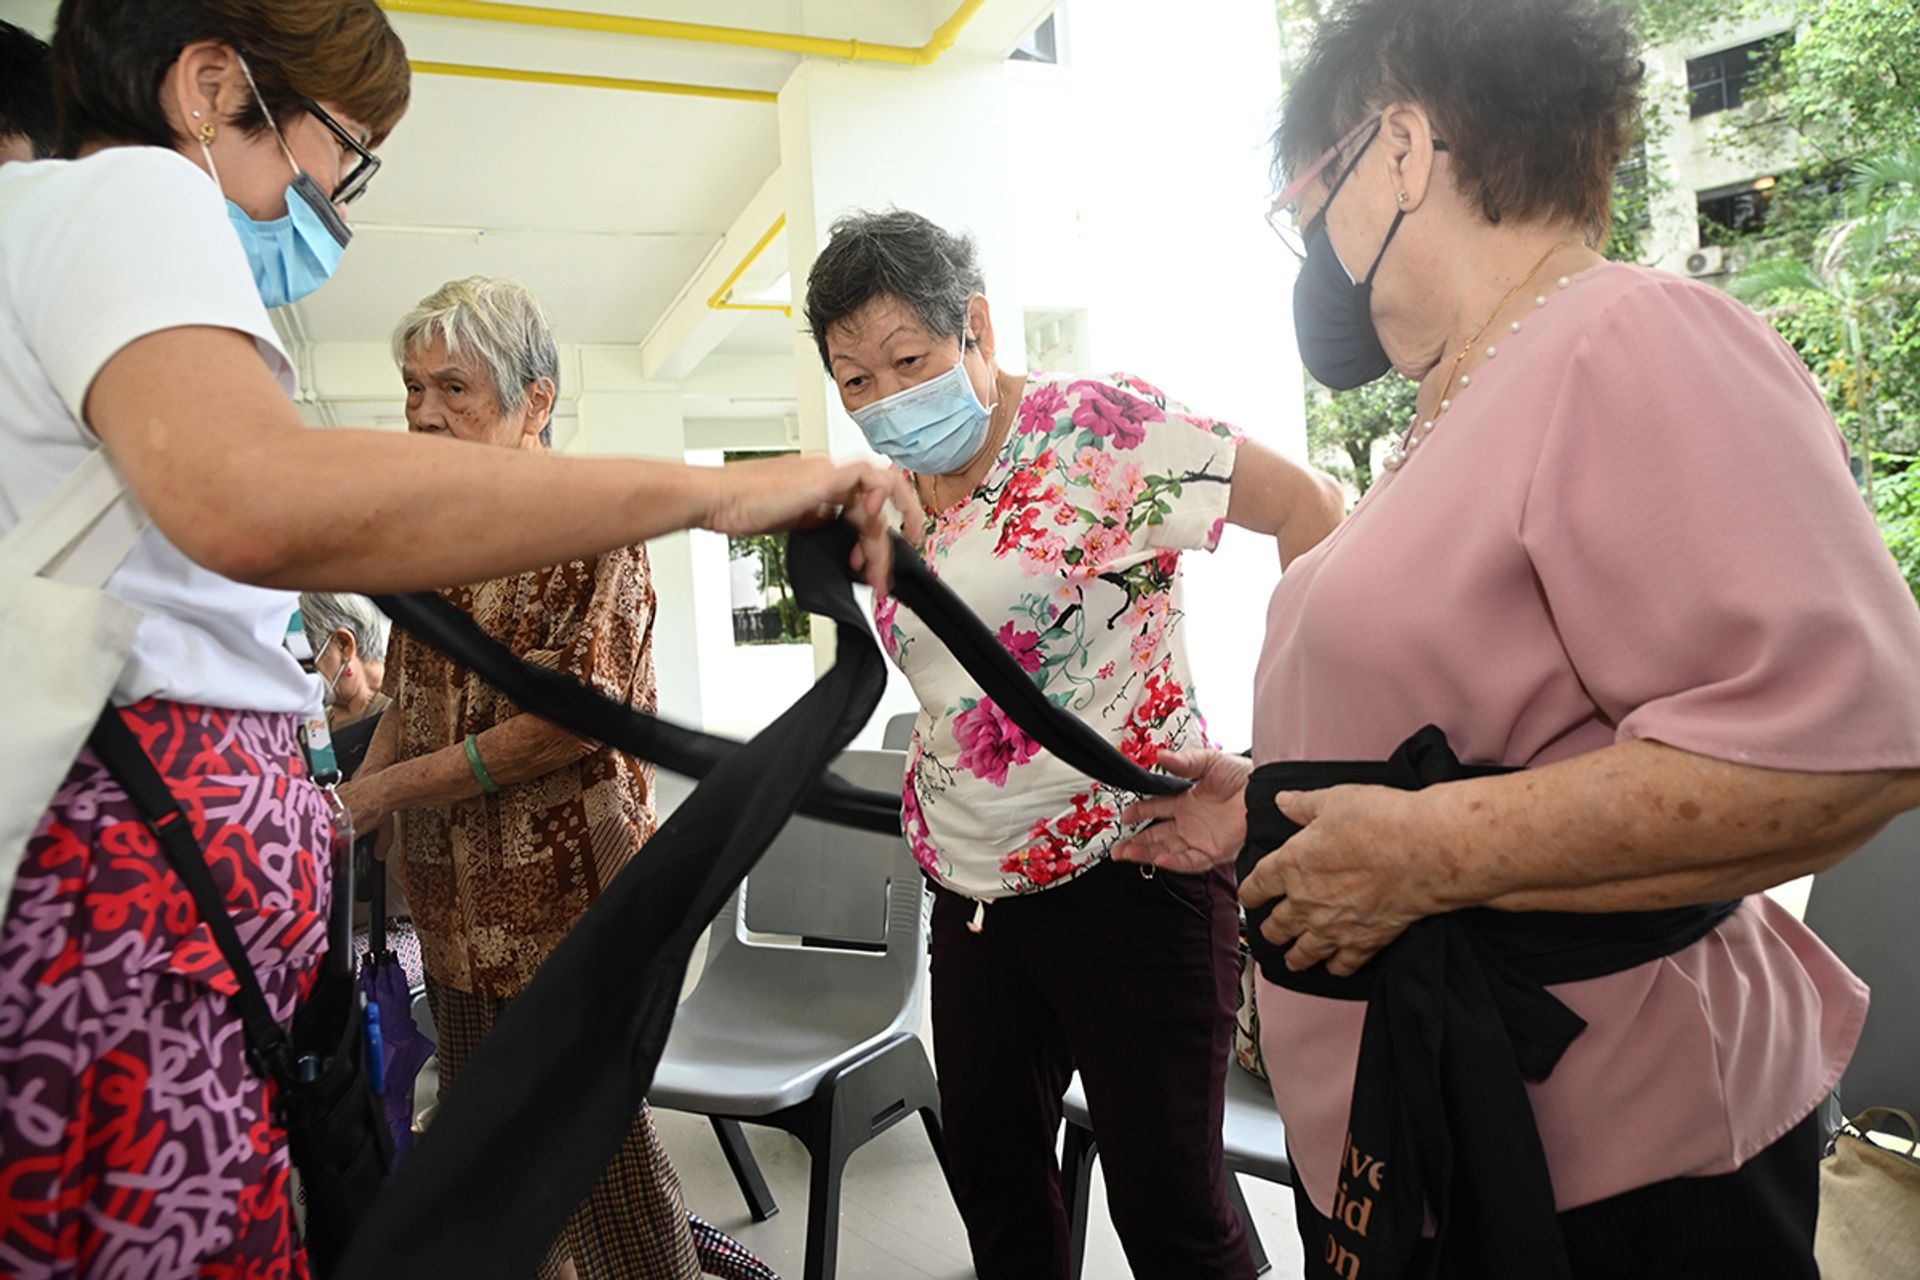 Madam Teo Poh Eng (centre) putting on a sash with the help of Ms Bo Chai Hiah during a practice session at Fei Yue Active Ageing Centre in Holland Close on Dec 29, 2023.